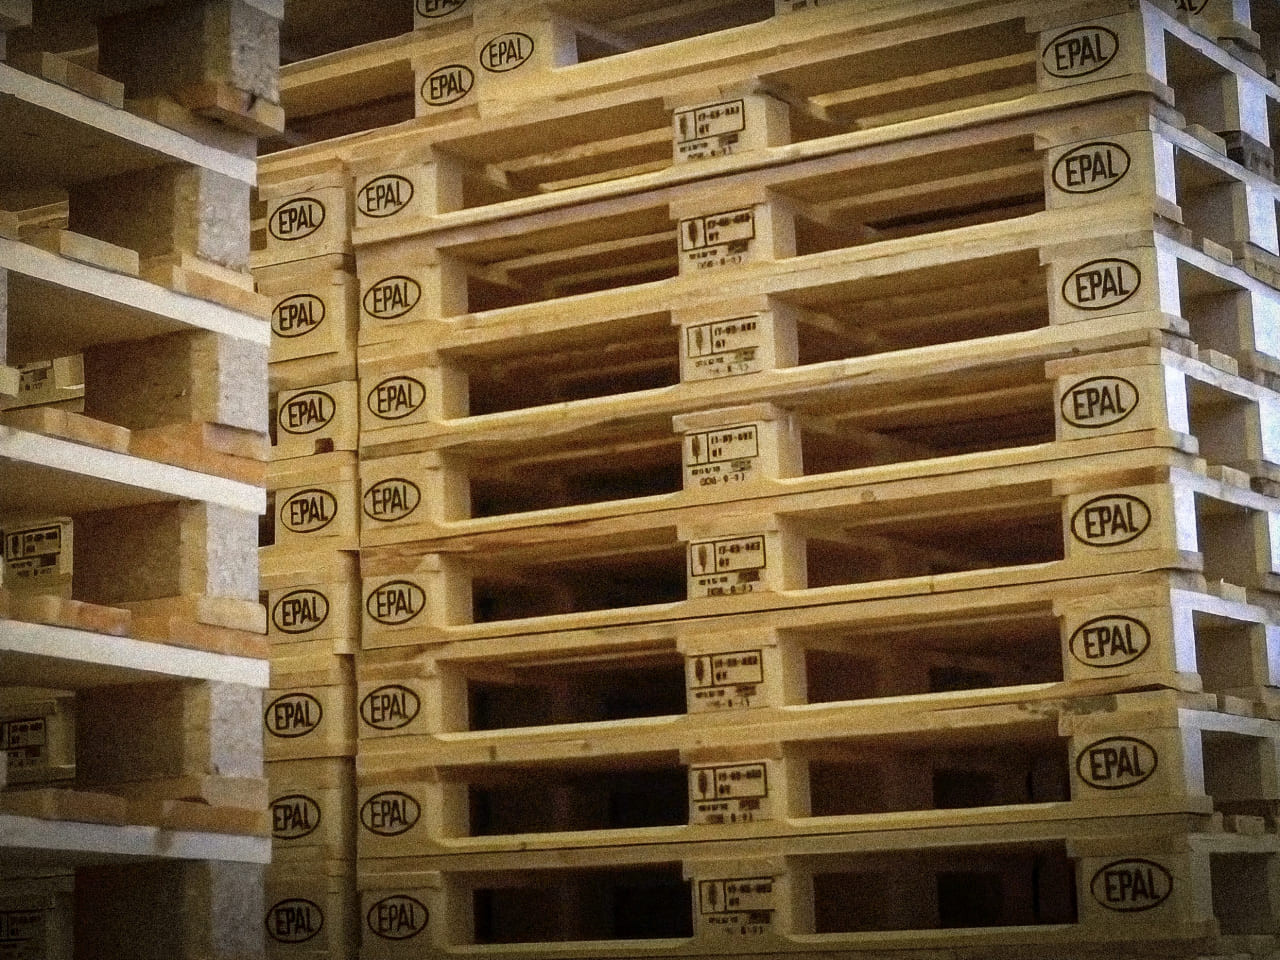 Pallets: dimensions, standards and usage practices